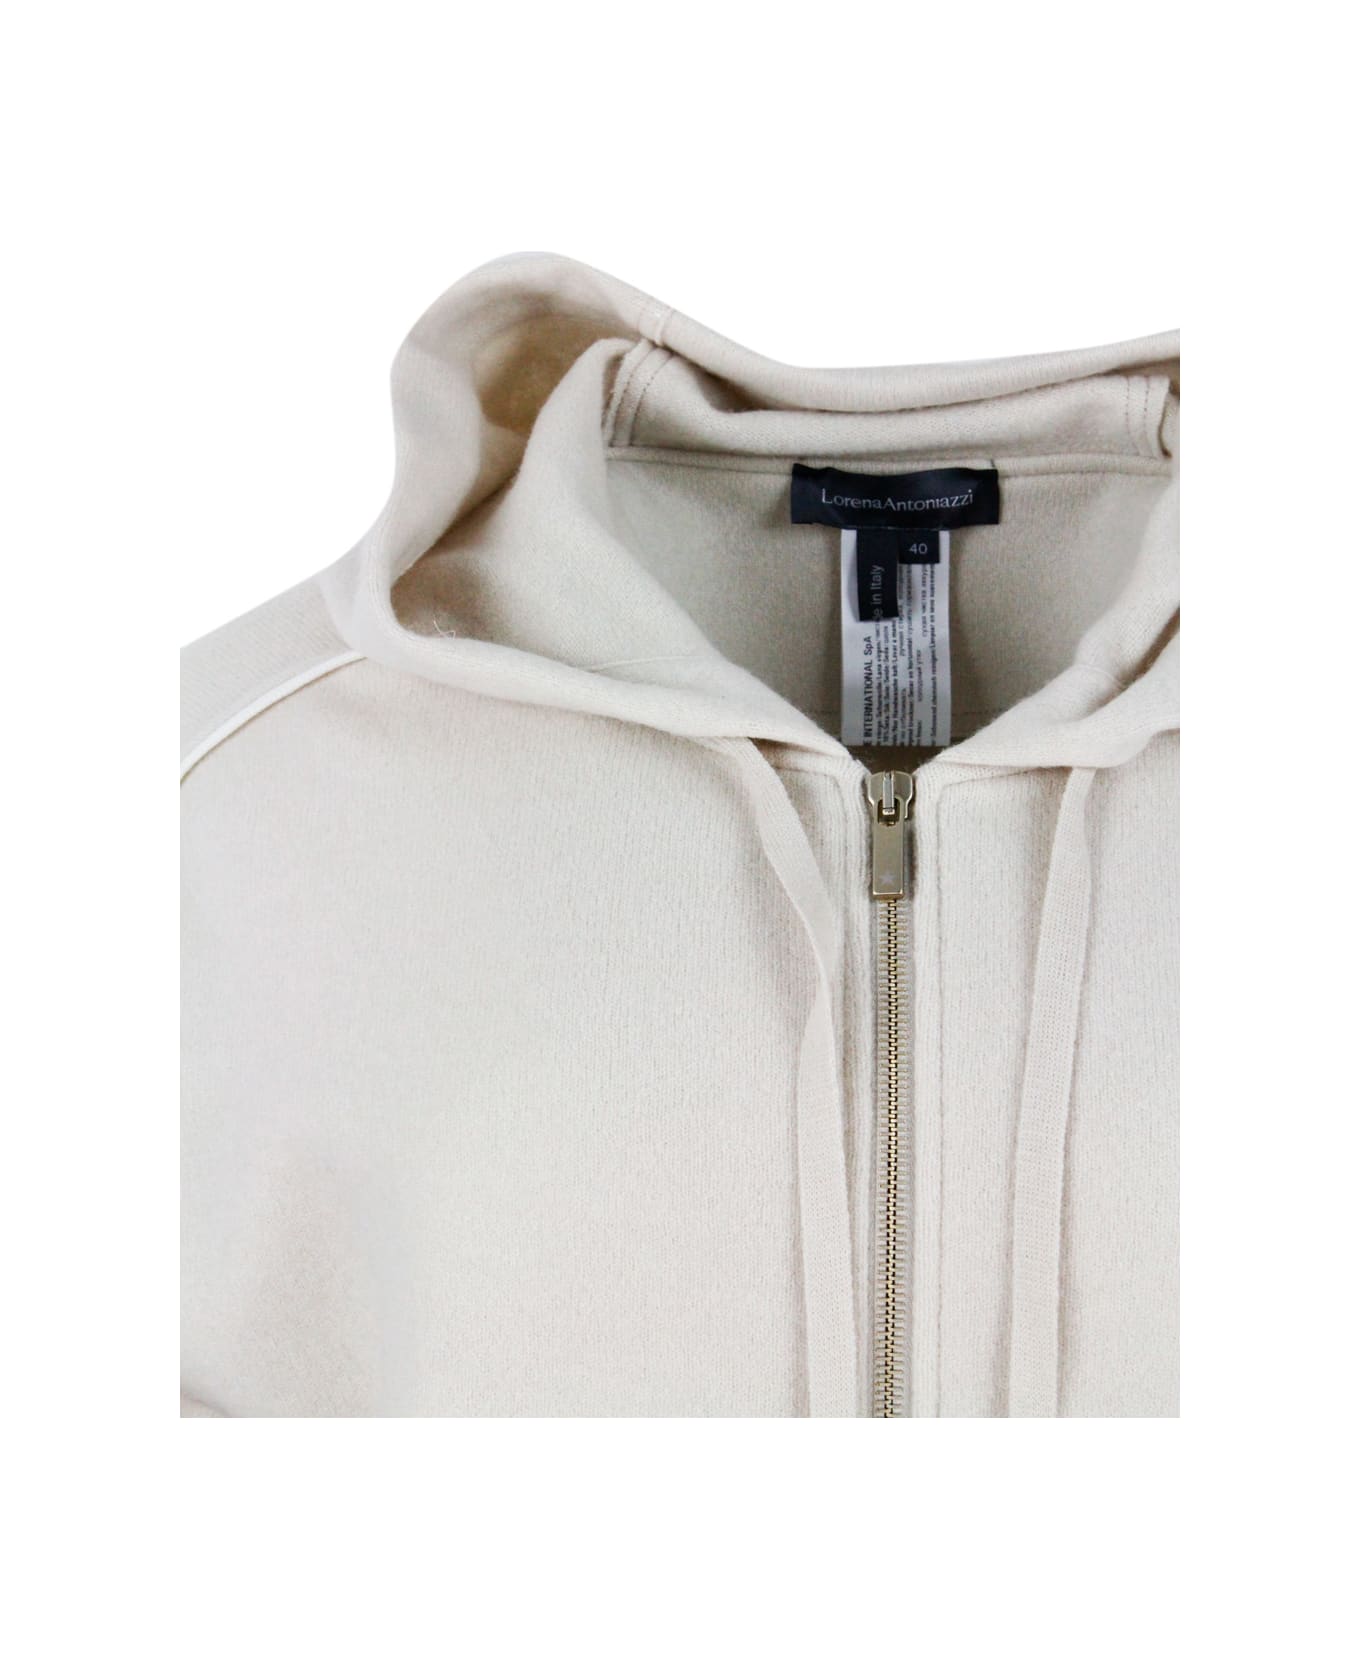 Lorena Antoniazzi Sweatshirt-style Hooded WIP With Drawstring And Zip Closure Made Of Wool, Cashmere And Silk - Beige